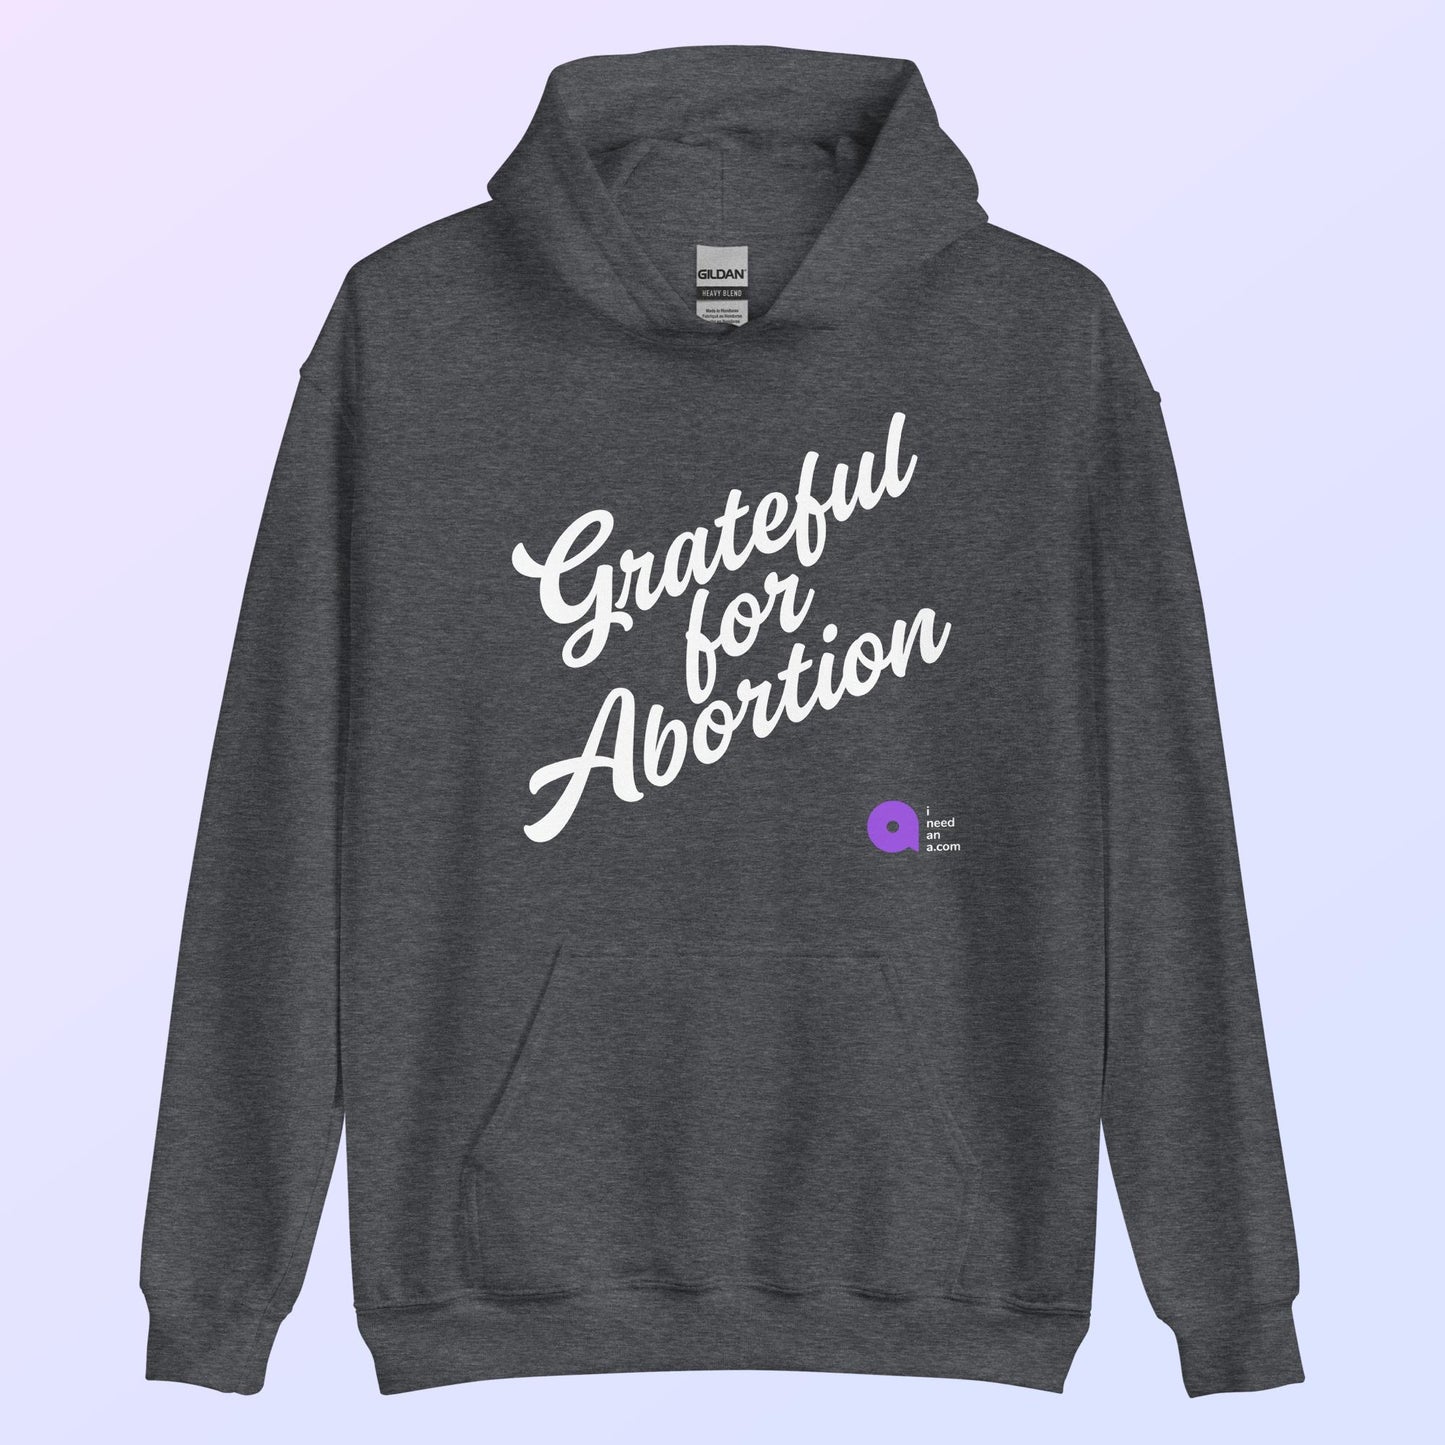 Grateful for Abortion hoodie!